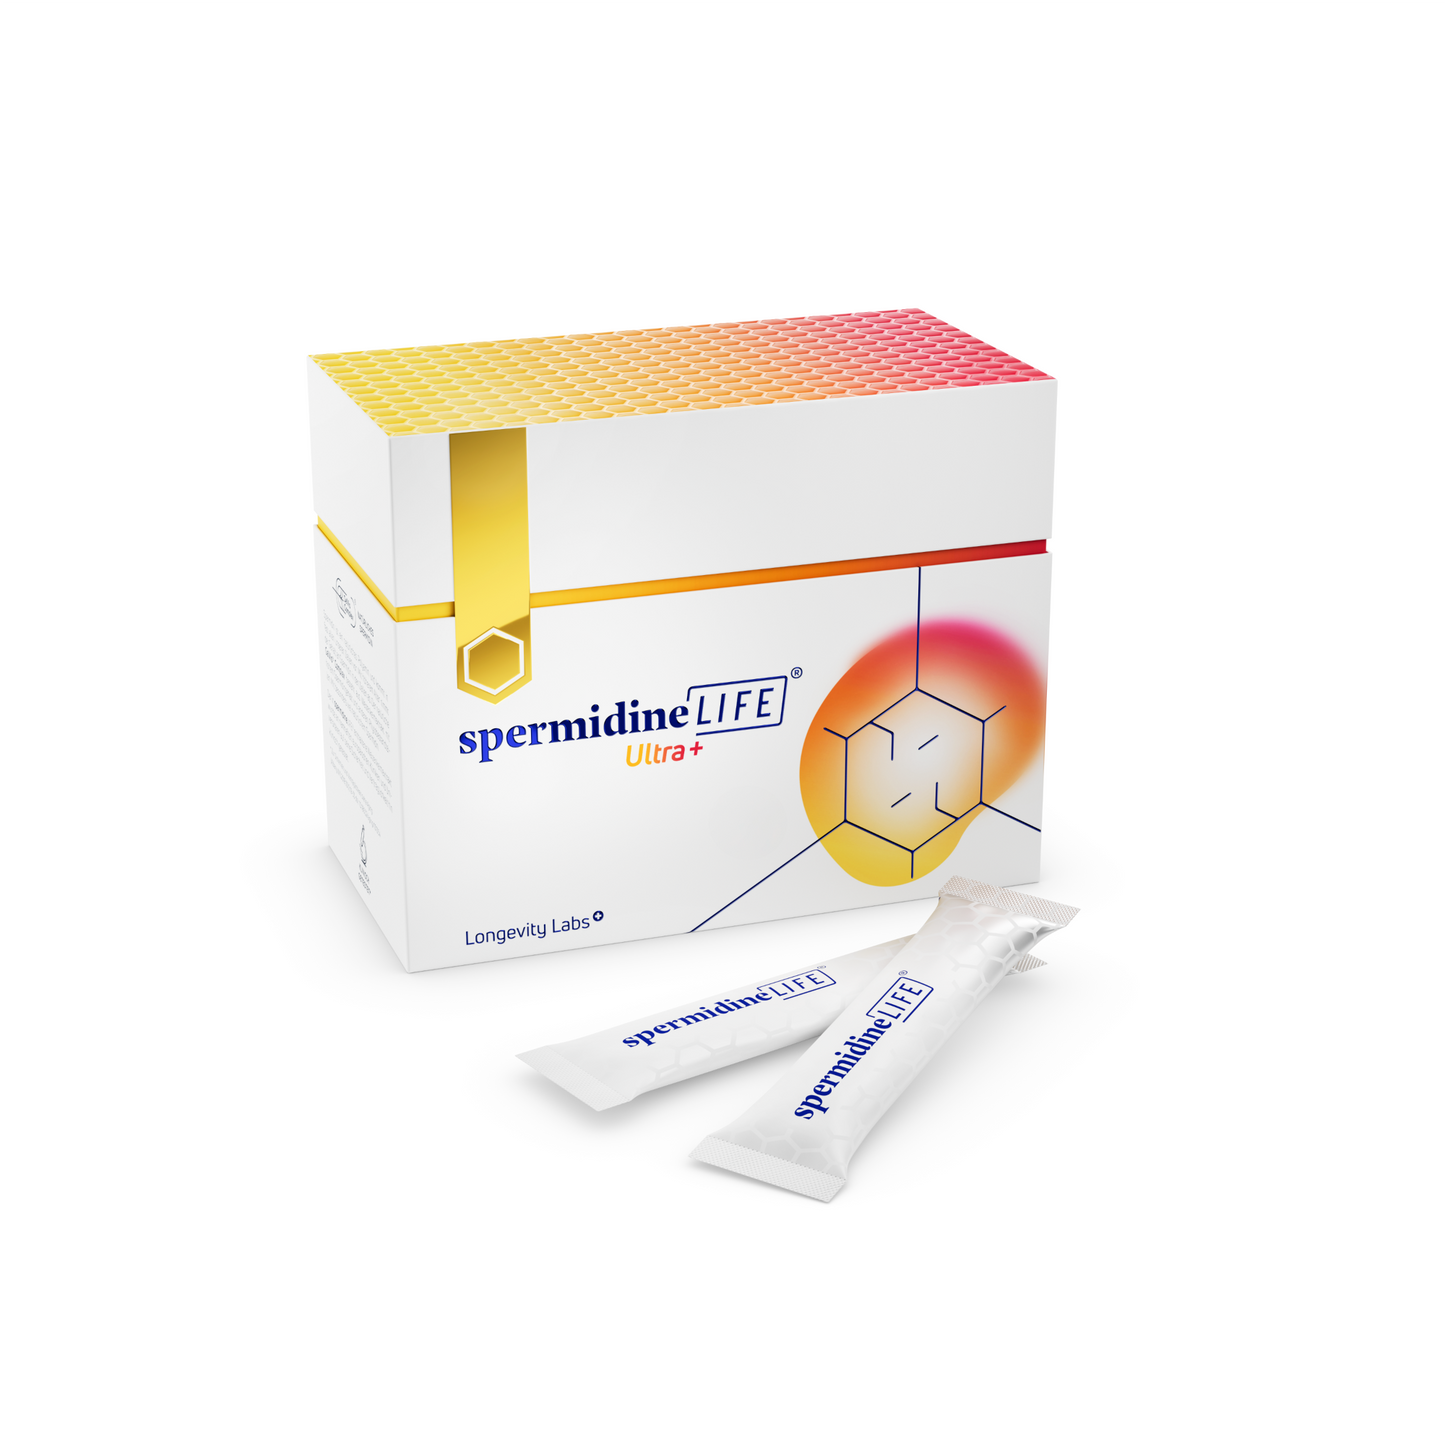 spermidineLIFE Ultra+ Box and packets